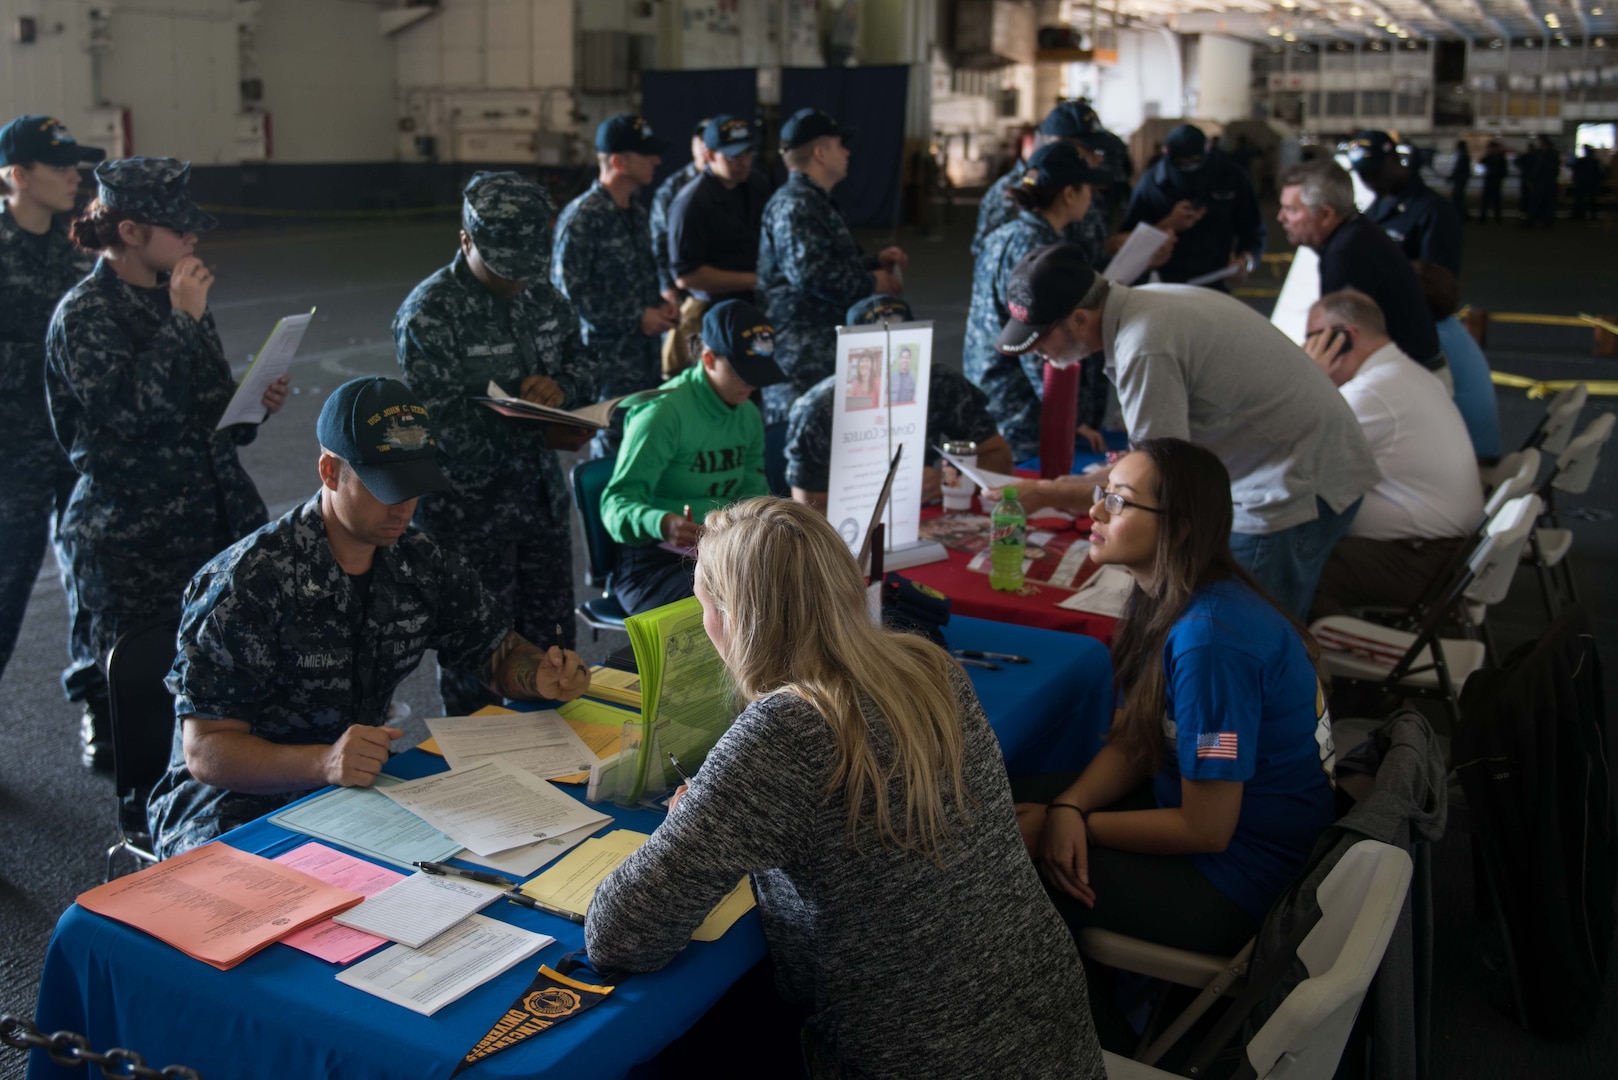 Representatives from Navy College Program for Afloat College Education, or NCPACE, Olympic College, Coast Line Community College and Vincennes University speak to Sailors about educational opportunities during an NCPACE sign-up event in the hangar bay aboard the aircraft carrier USS John C. Stennis (CVN 74) in Bremerton, Washington.